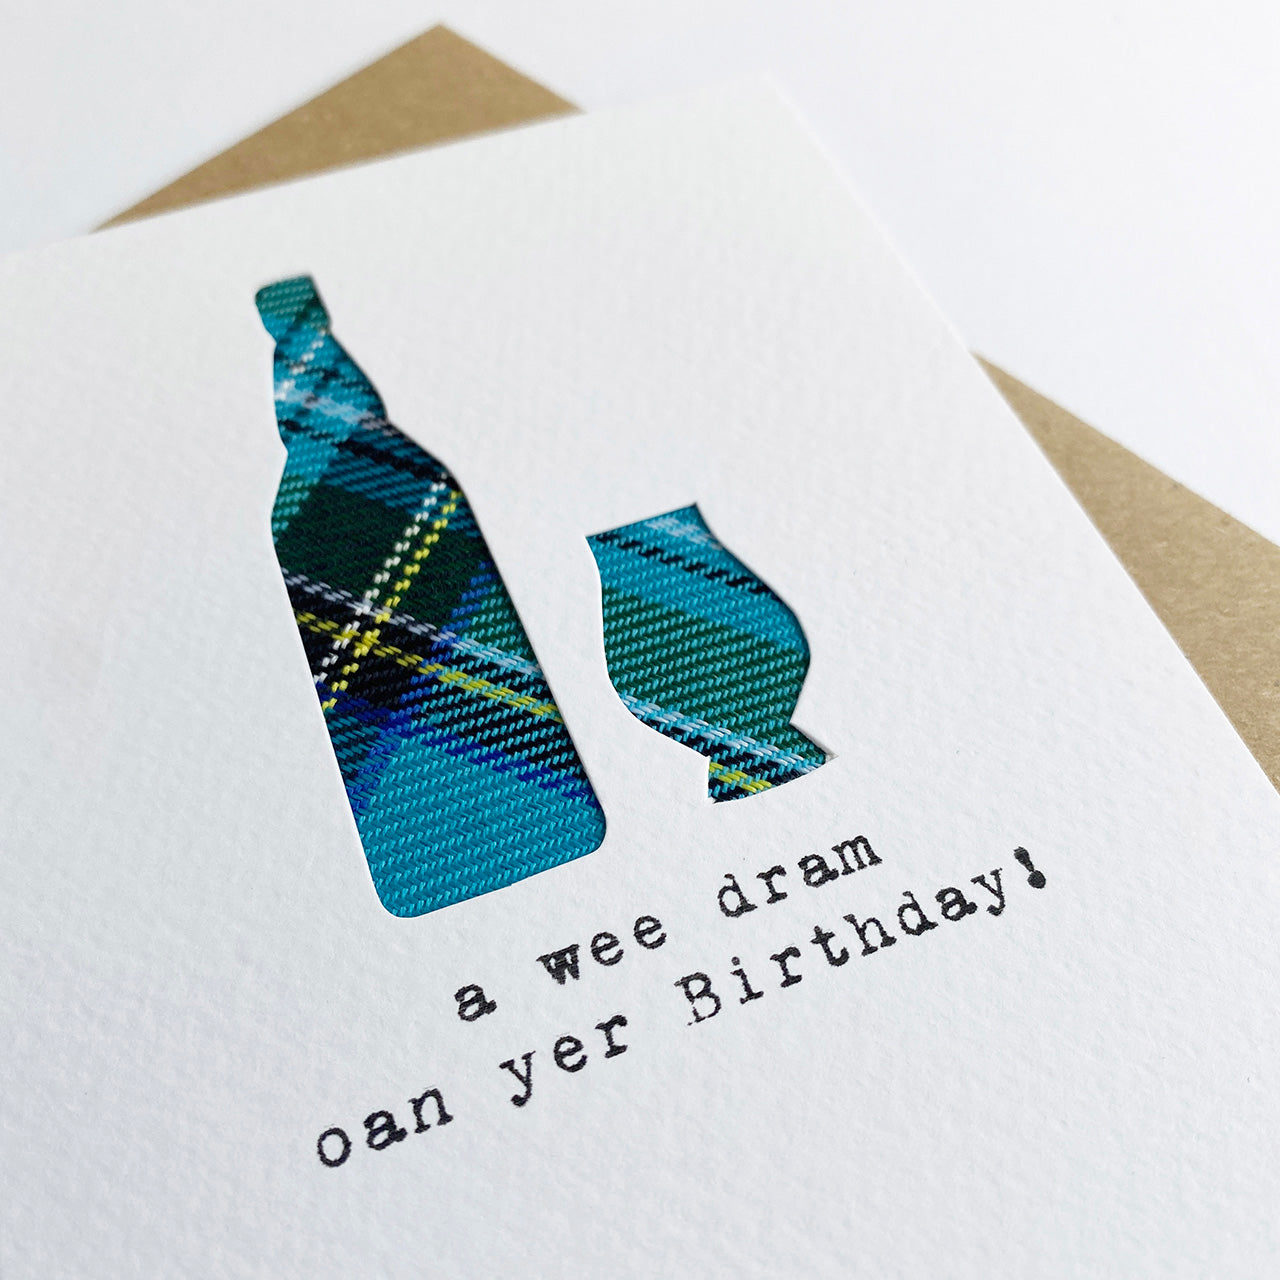 'A Wee Dram Oan Yer Birthday' Scottish Birthday Card for Whisky Lovers - HiyaPal